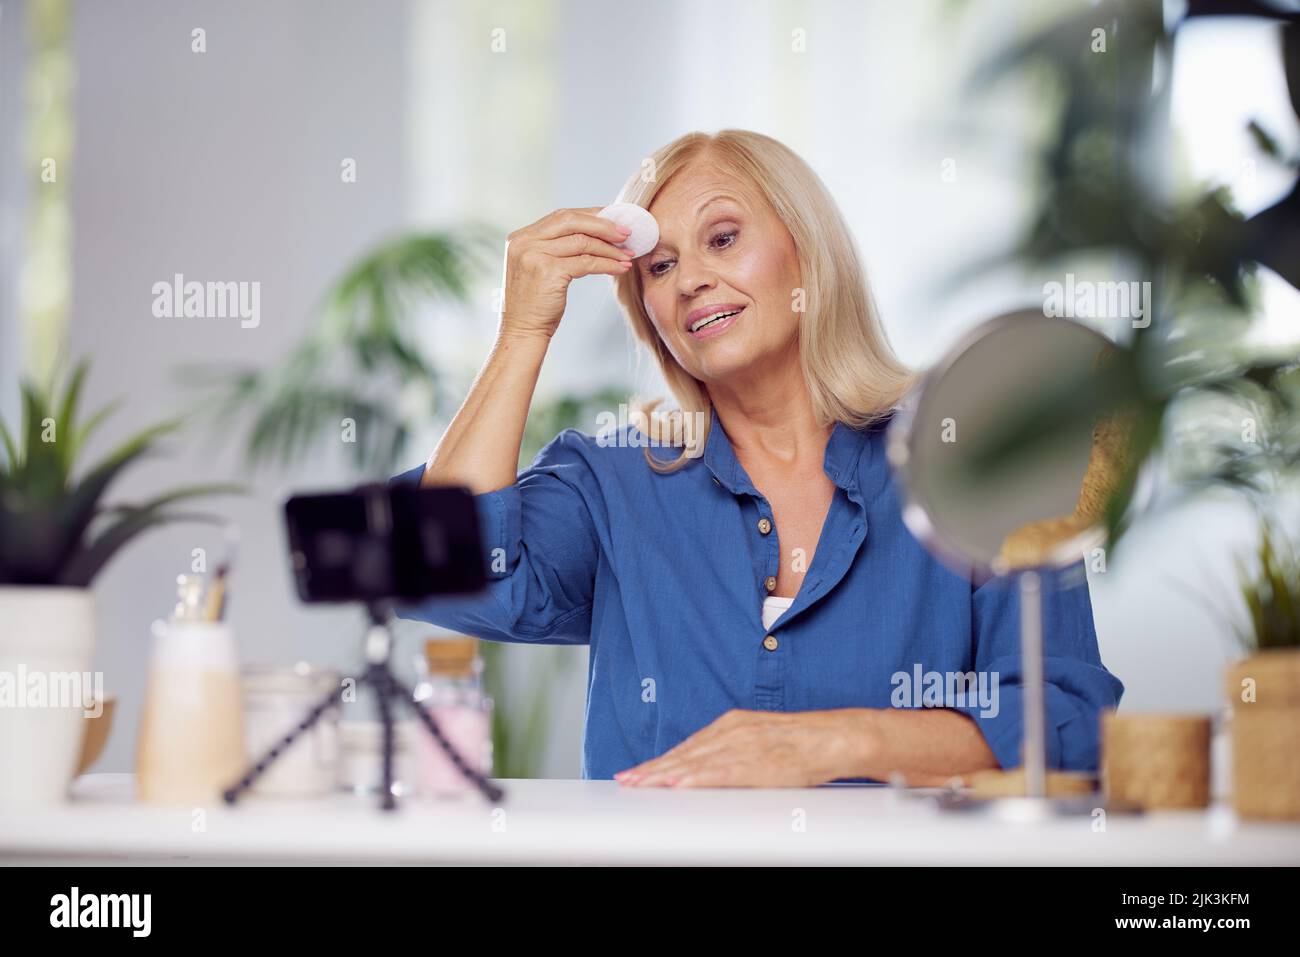 A senior woman blogging about how to properly remove make-up from face. Stock Photo